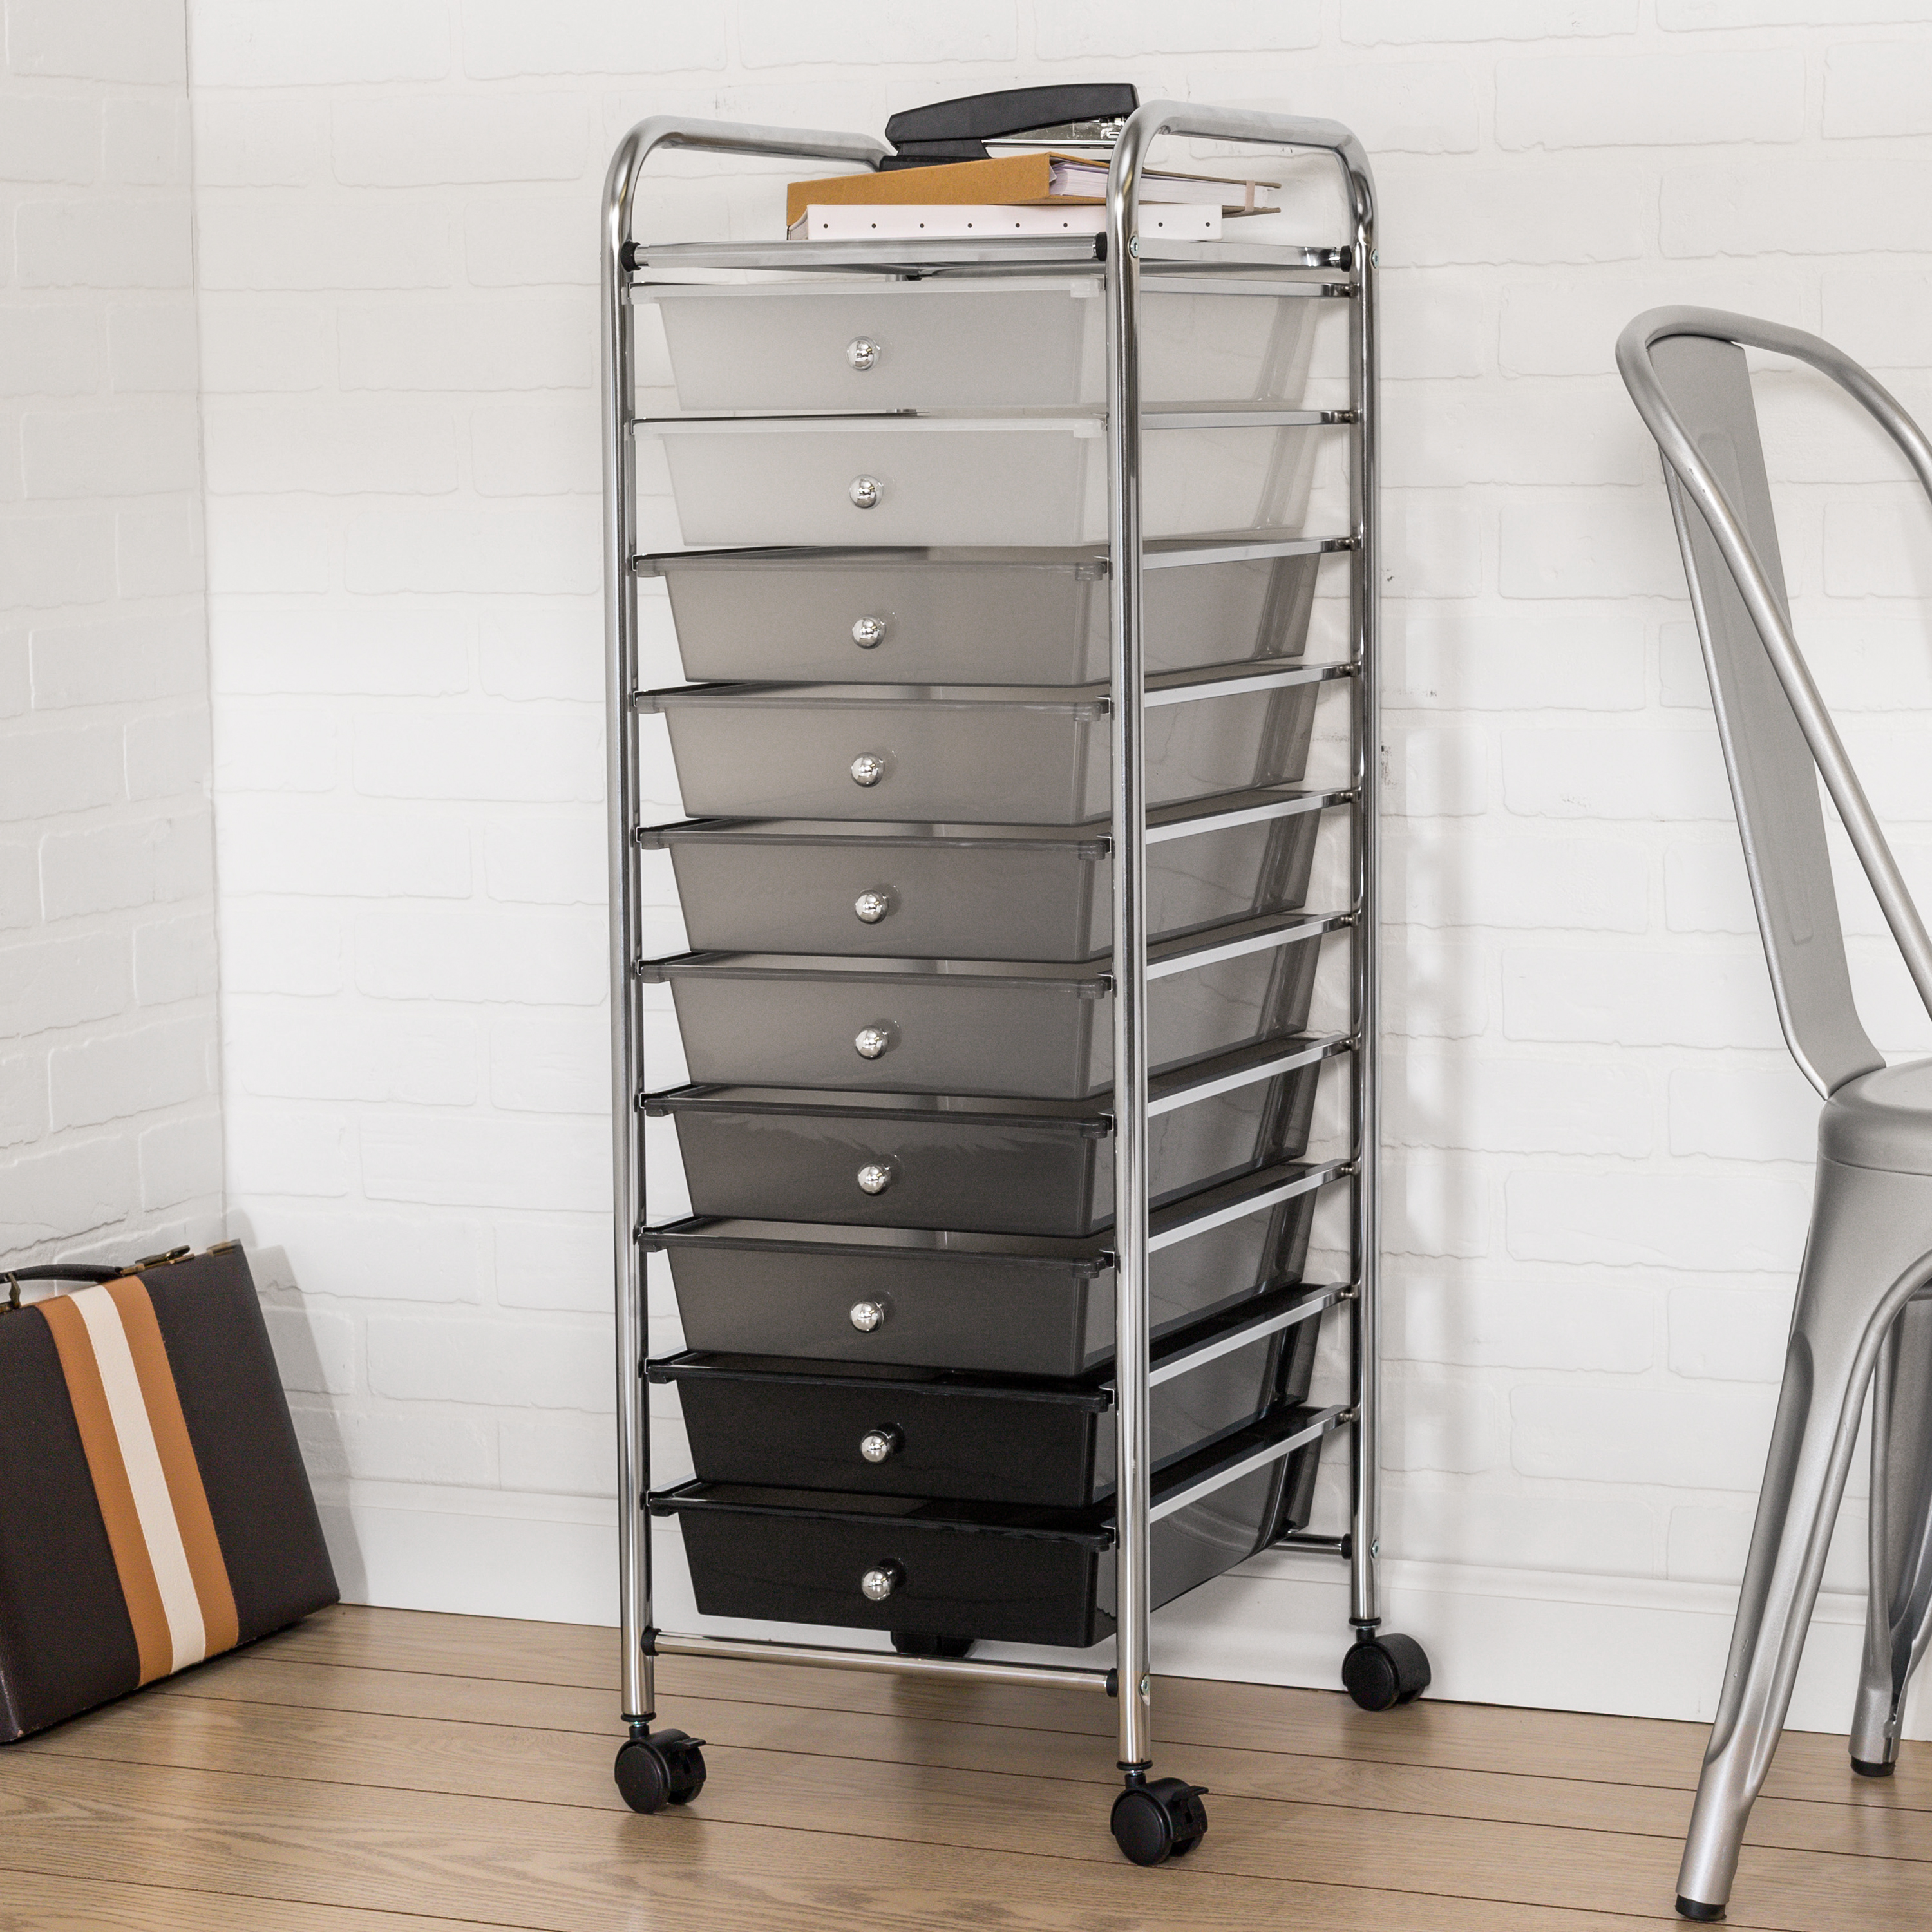 Honey-Can-Do Plastic and Steel 10-Drawer Rolling Storage Cart with 1 Shelf, Gray Ombré - image 4 of 4